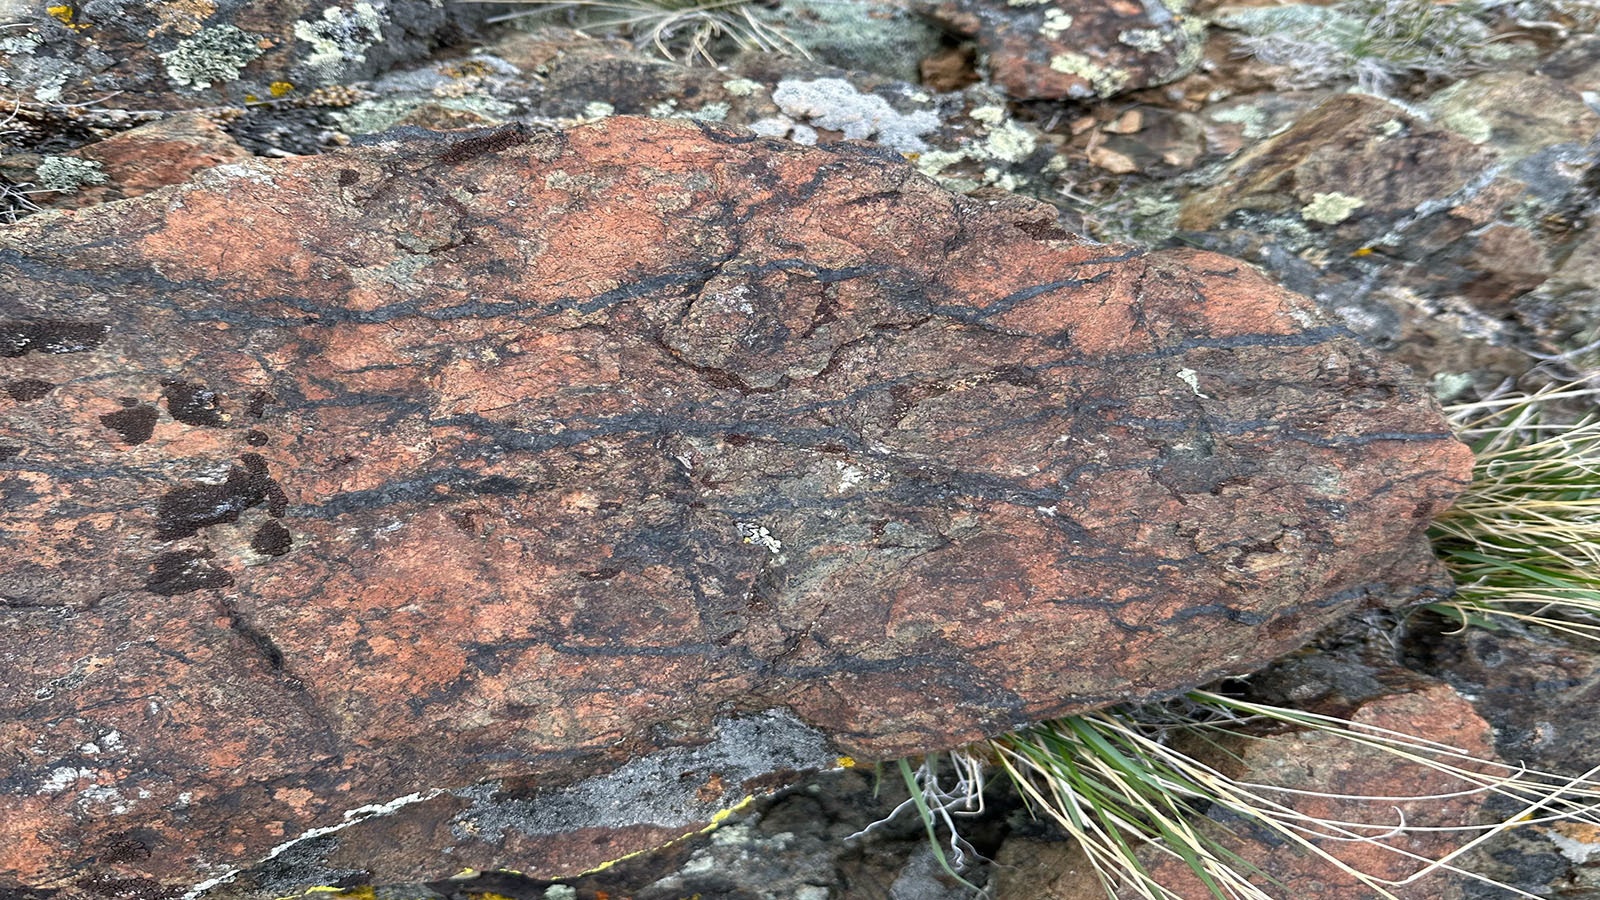 Close up of nickel-bearing magmatic rock at surface found by Visionary Metals Corp. in the Granite Mountains.